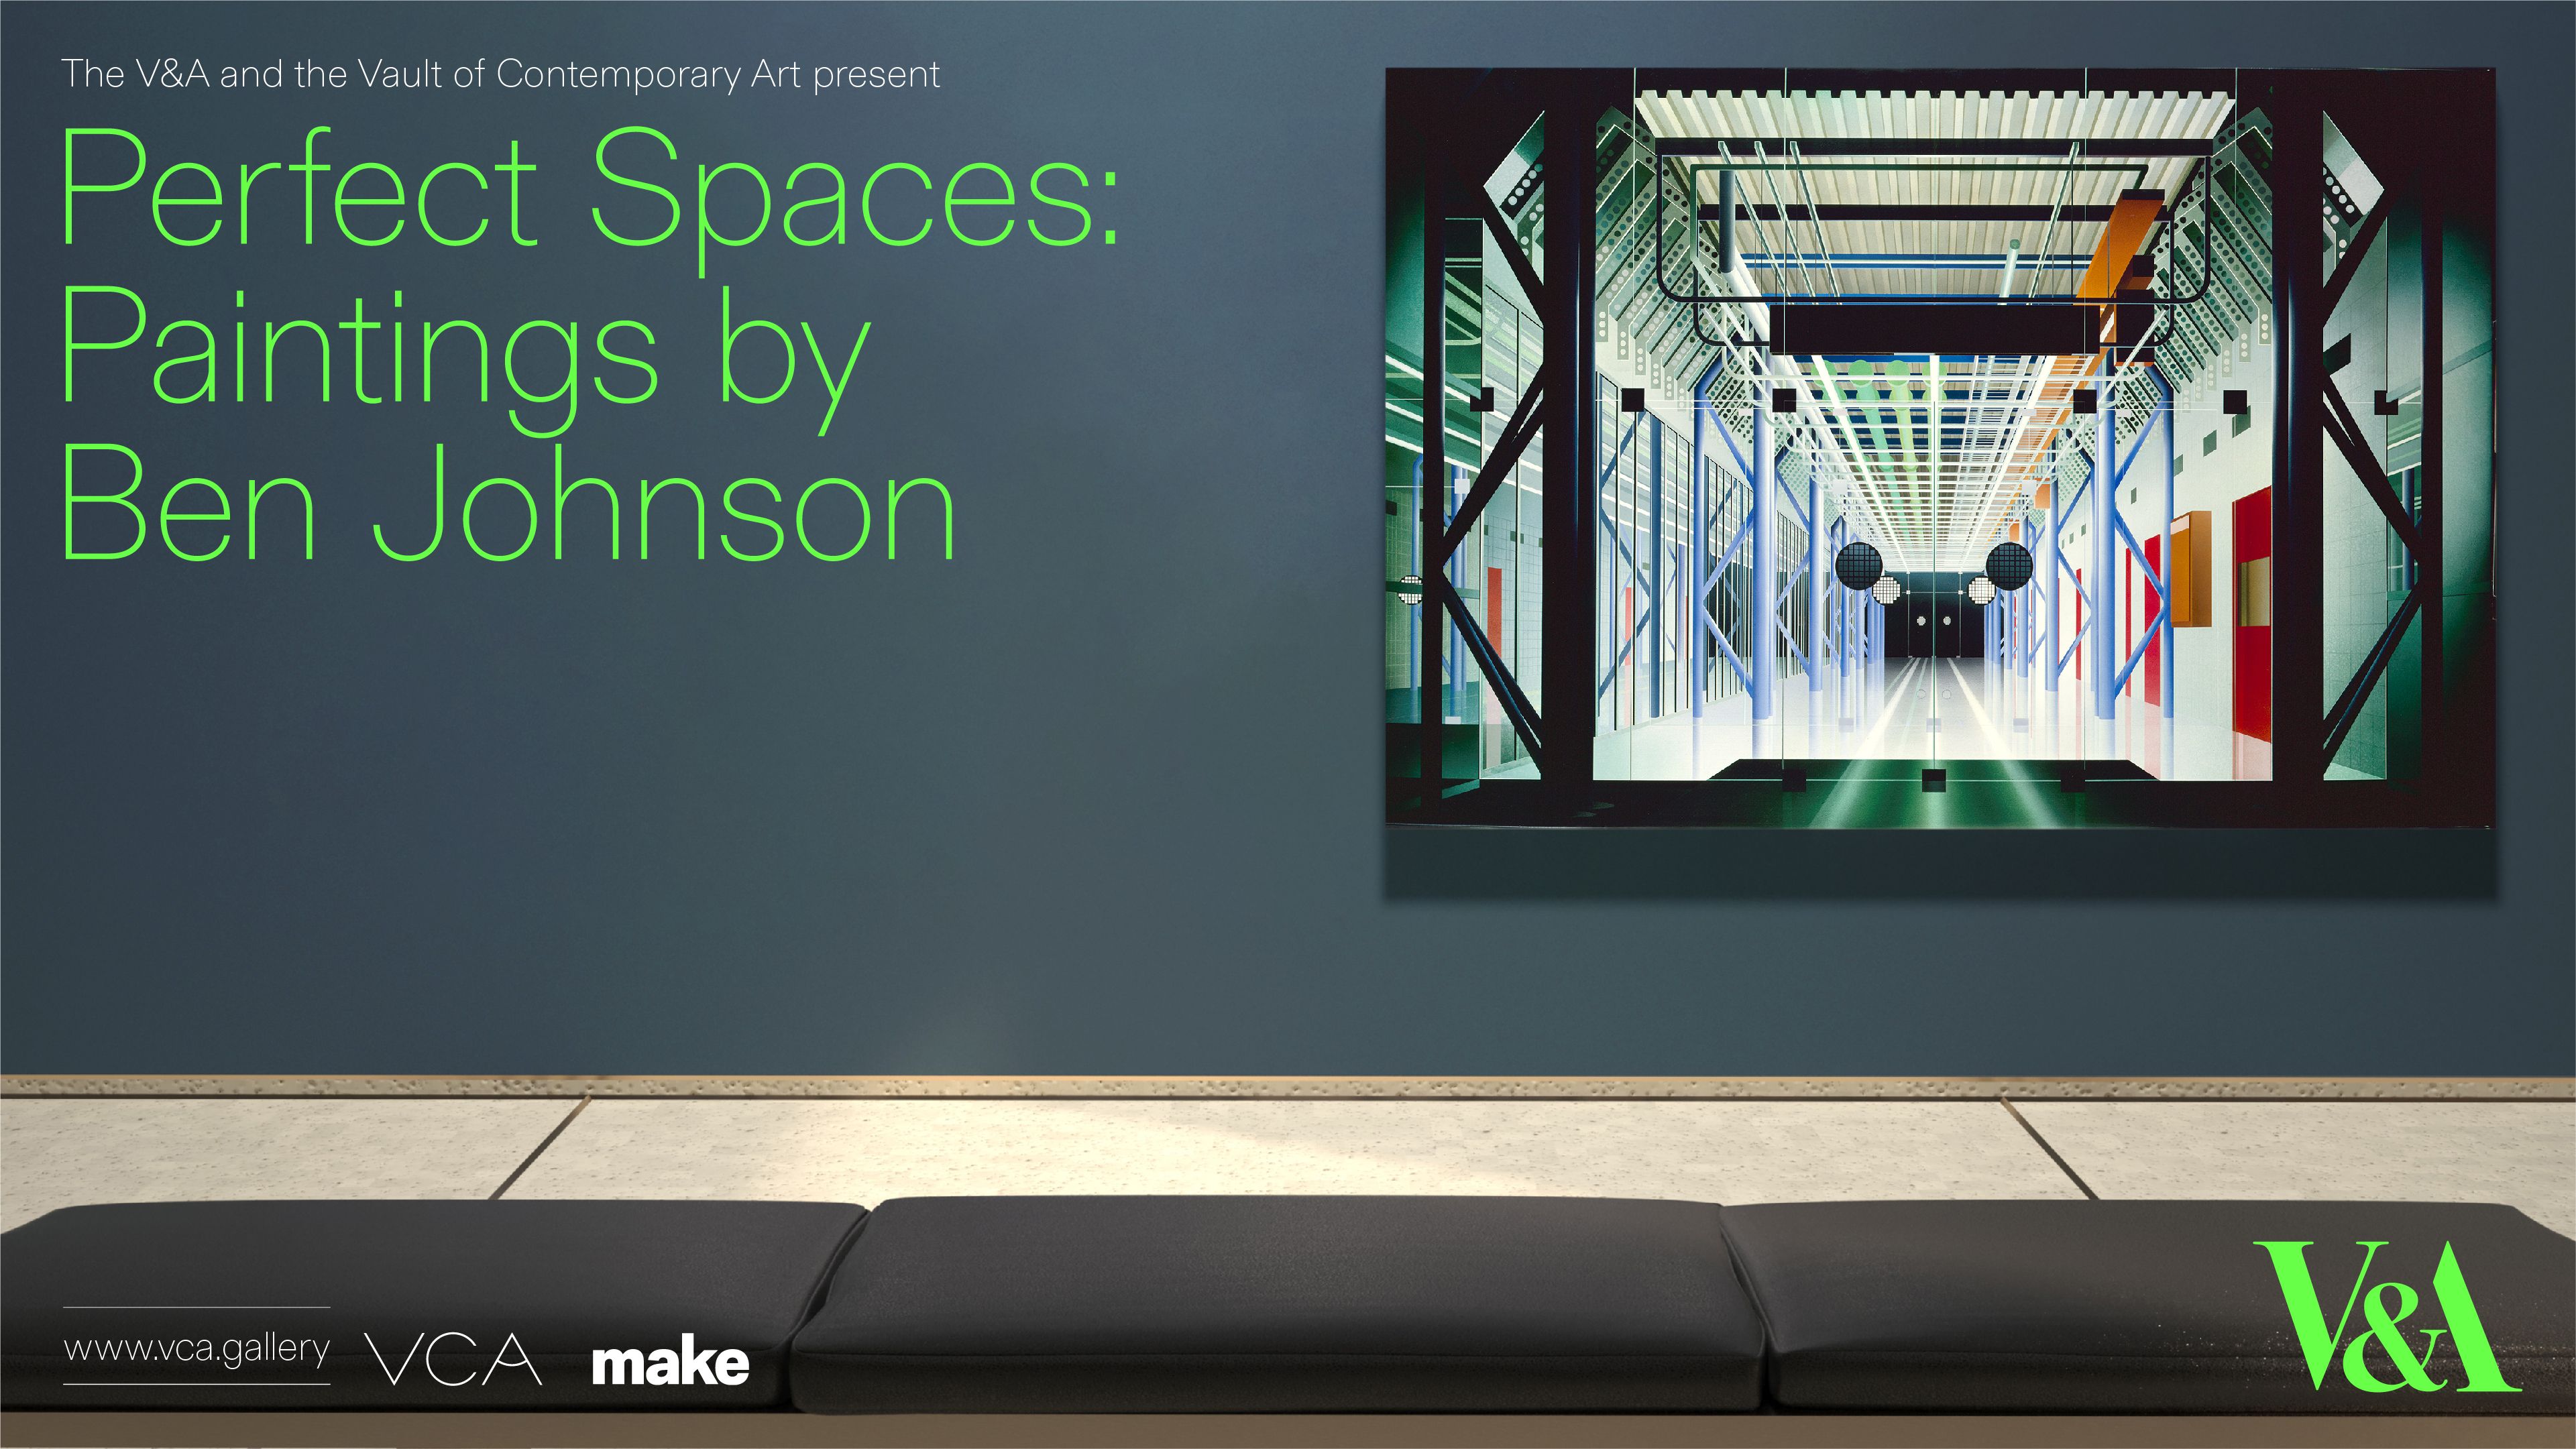 Perfect Spaces: Paintings by Ben Johnson